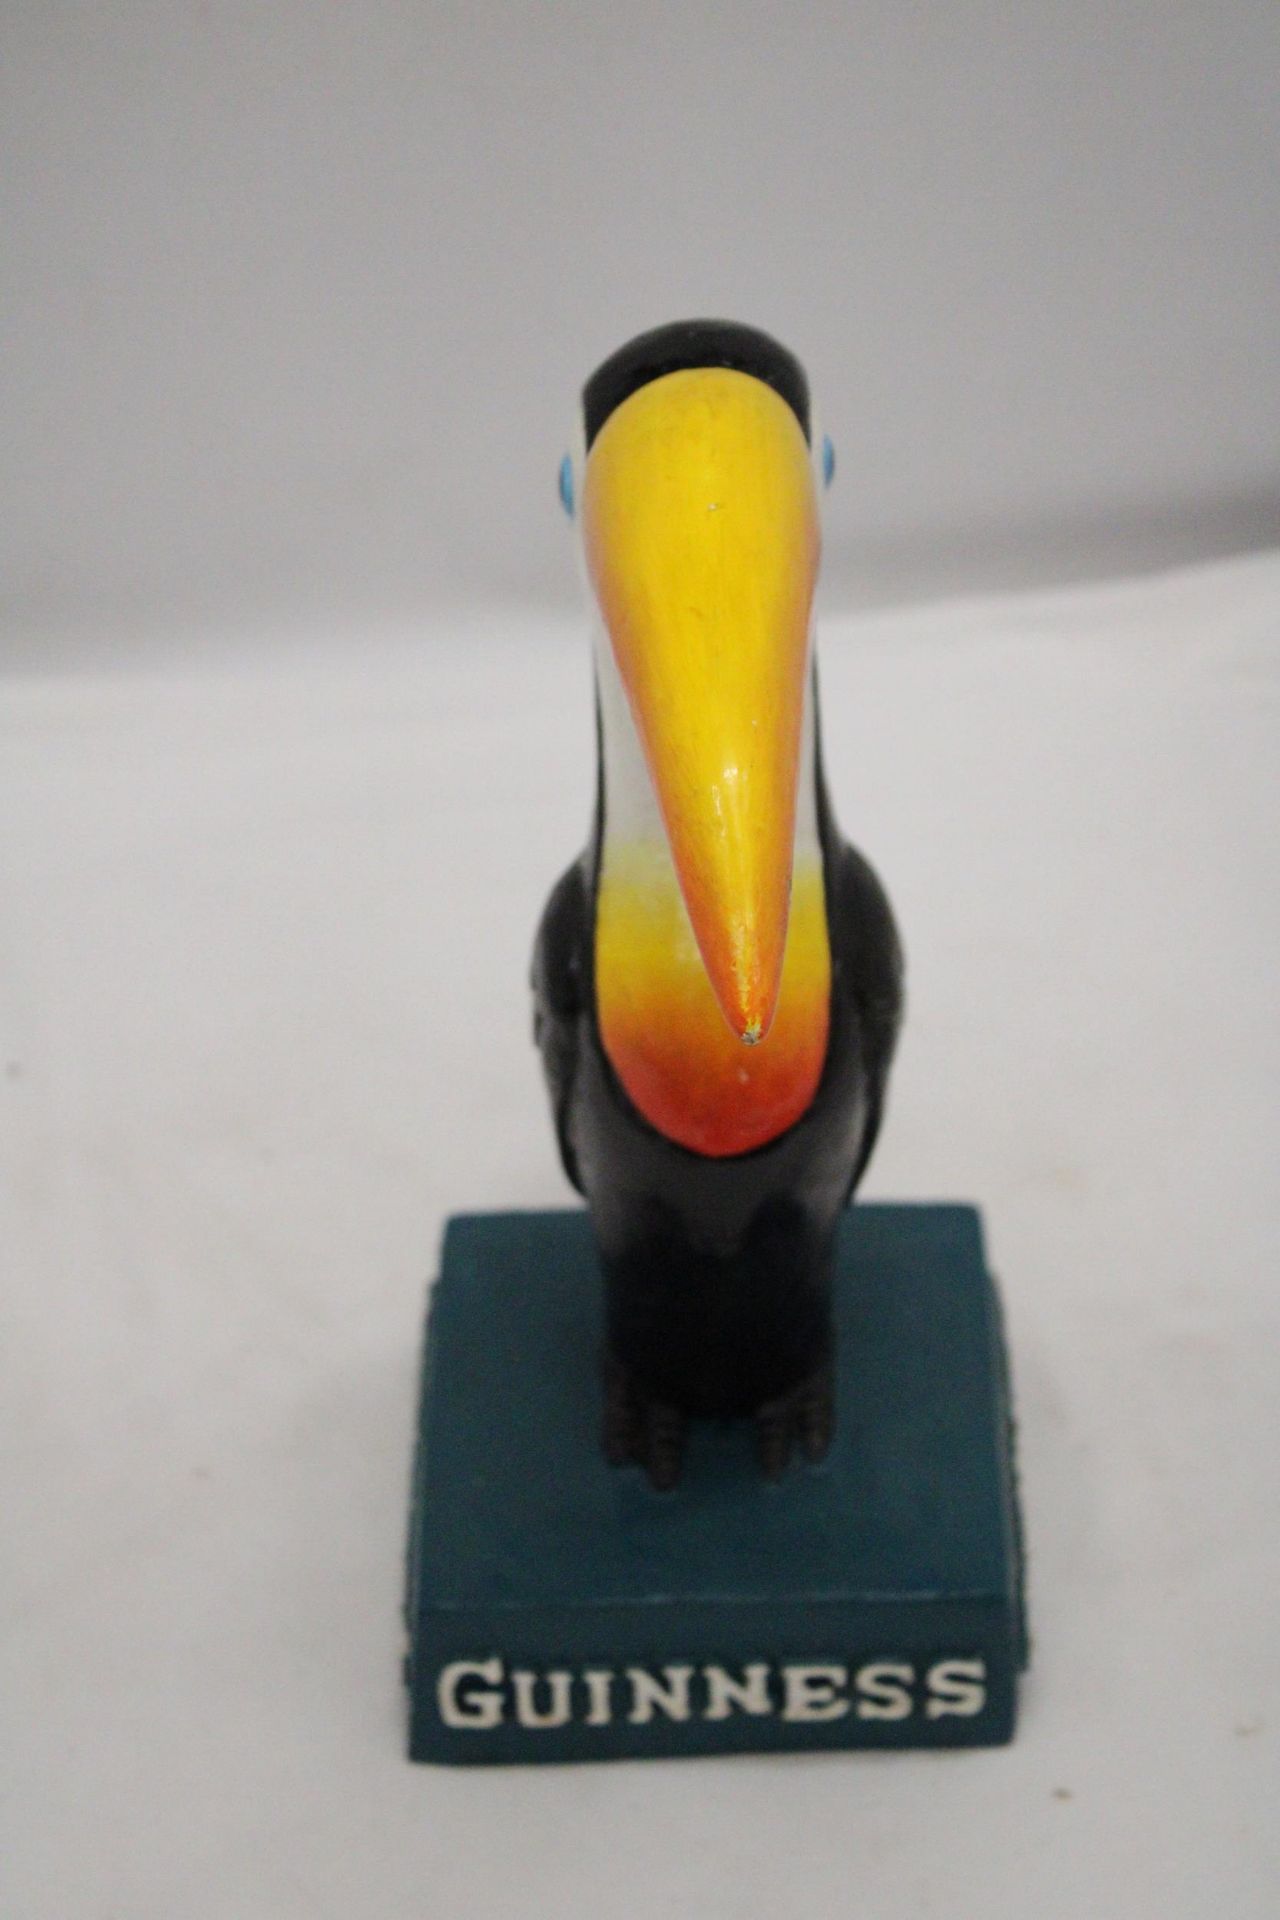 A LARGE RESIN 'GUINNESS' TOUCAN, HEIGHT 30CM - Image 2 of 6